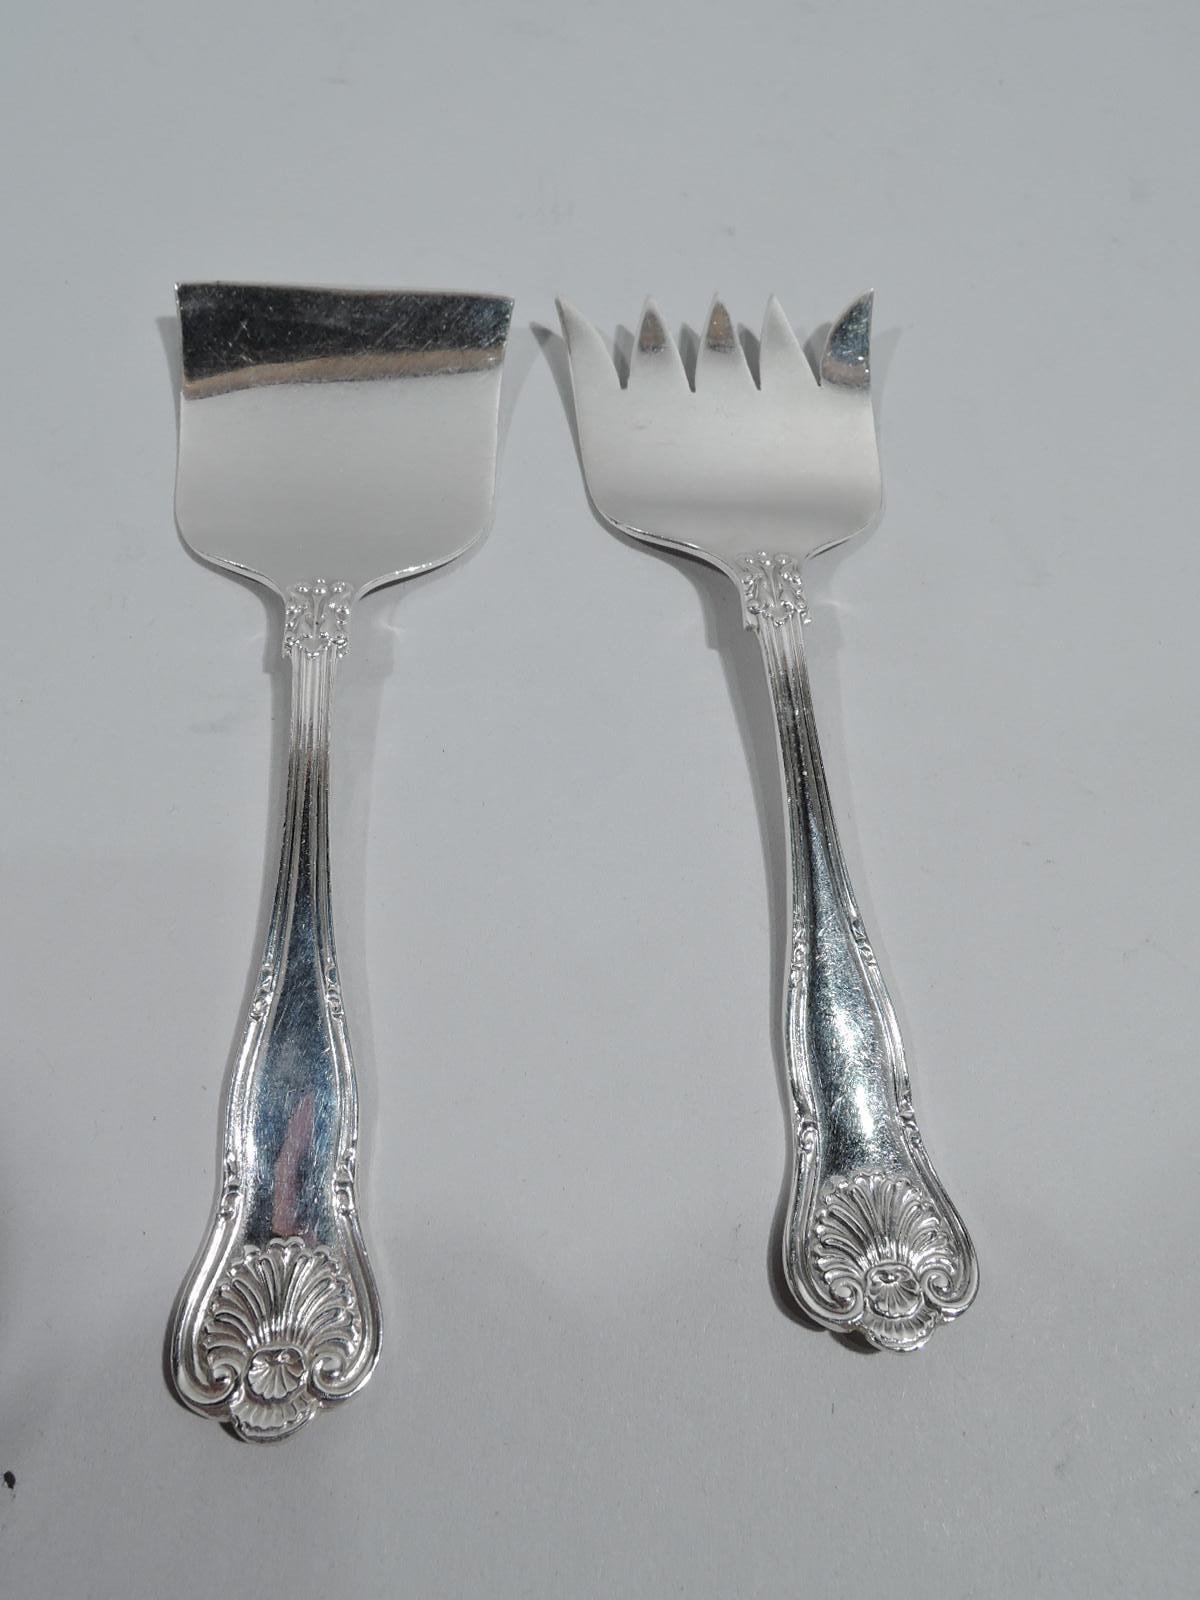 Edwardian Thread & Shell sterling silver sardine set. Made by John Round & Son in Sheffield in 1904. This set comprises a fork with 5 wide tines and server with curved bell-form blade. King-shaped handles. In leather-bound case with silk lining and